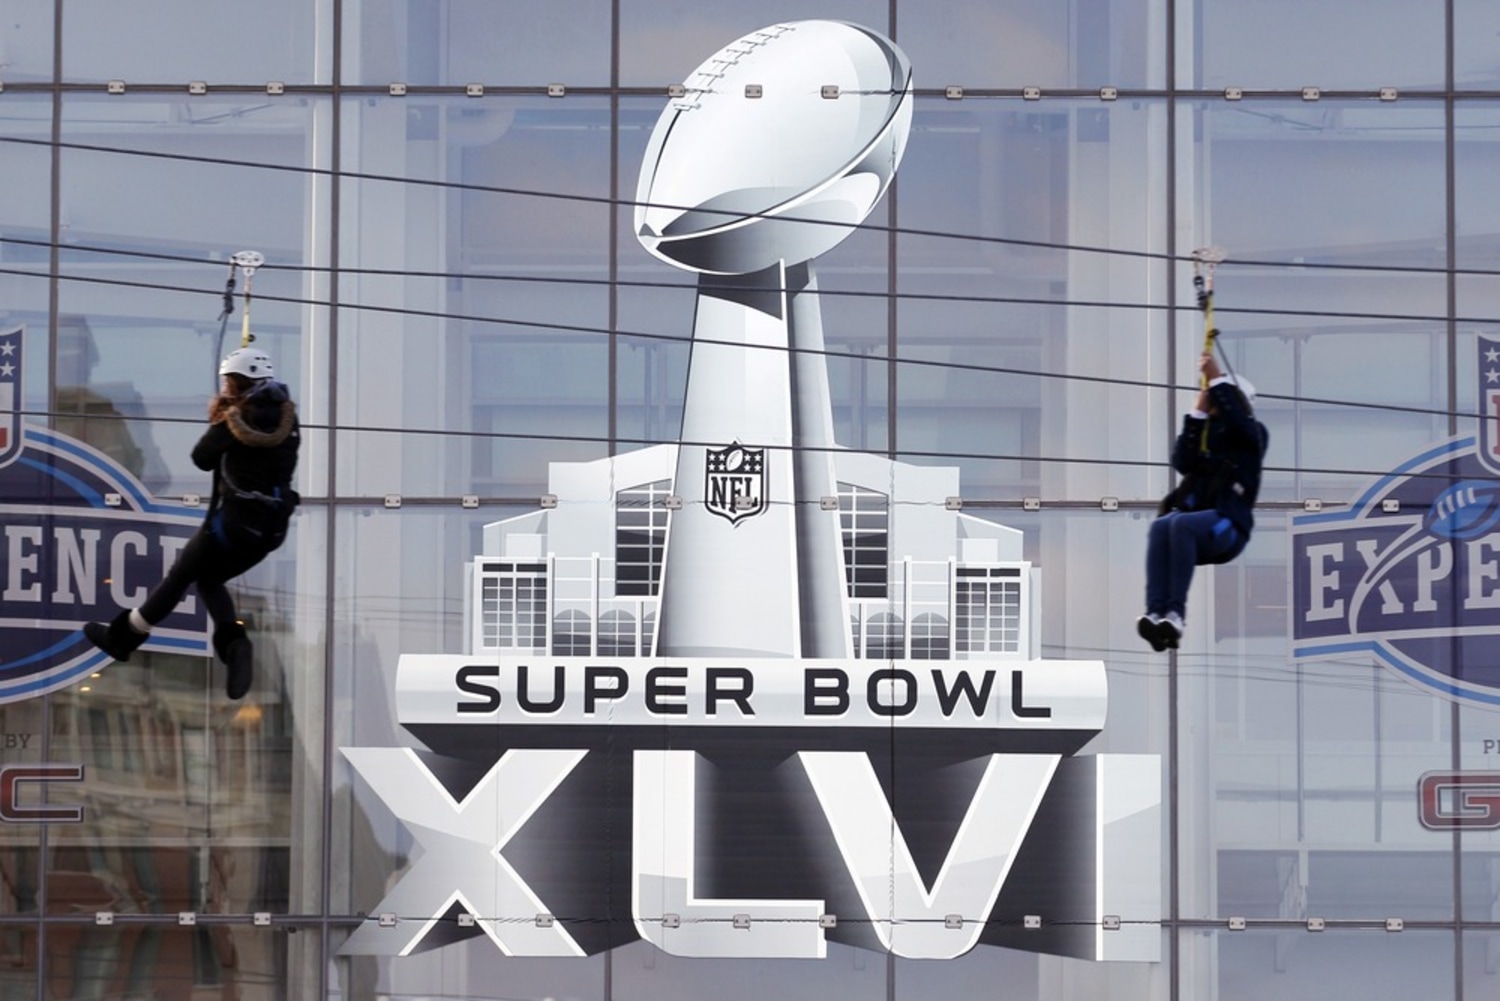 Super Bowl bonus: How much extra money do the winners and losers make?